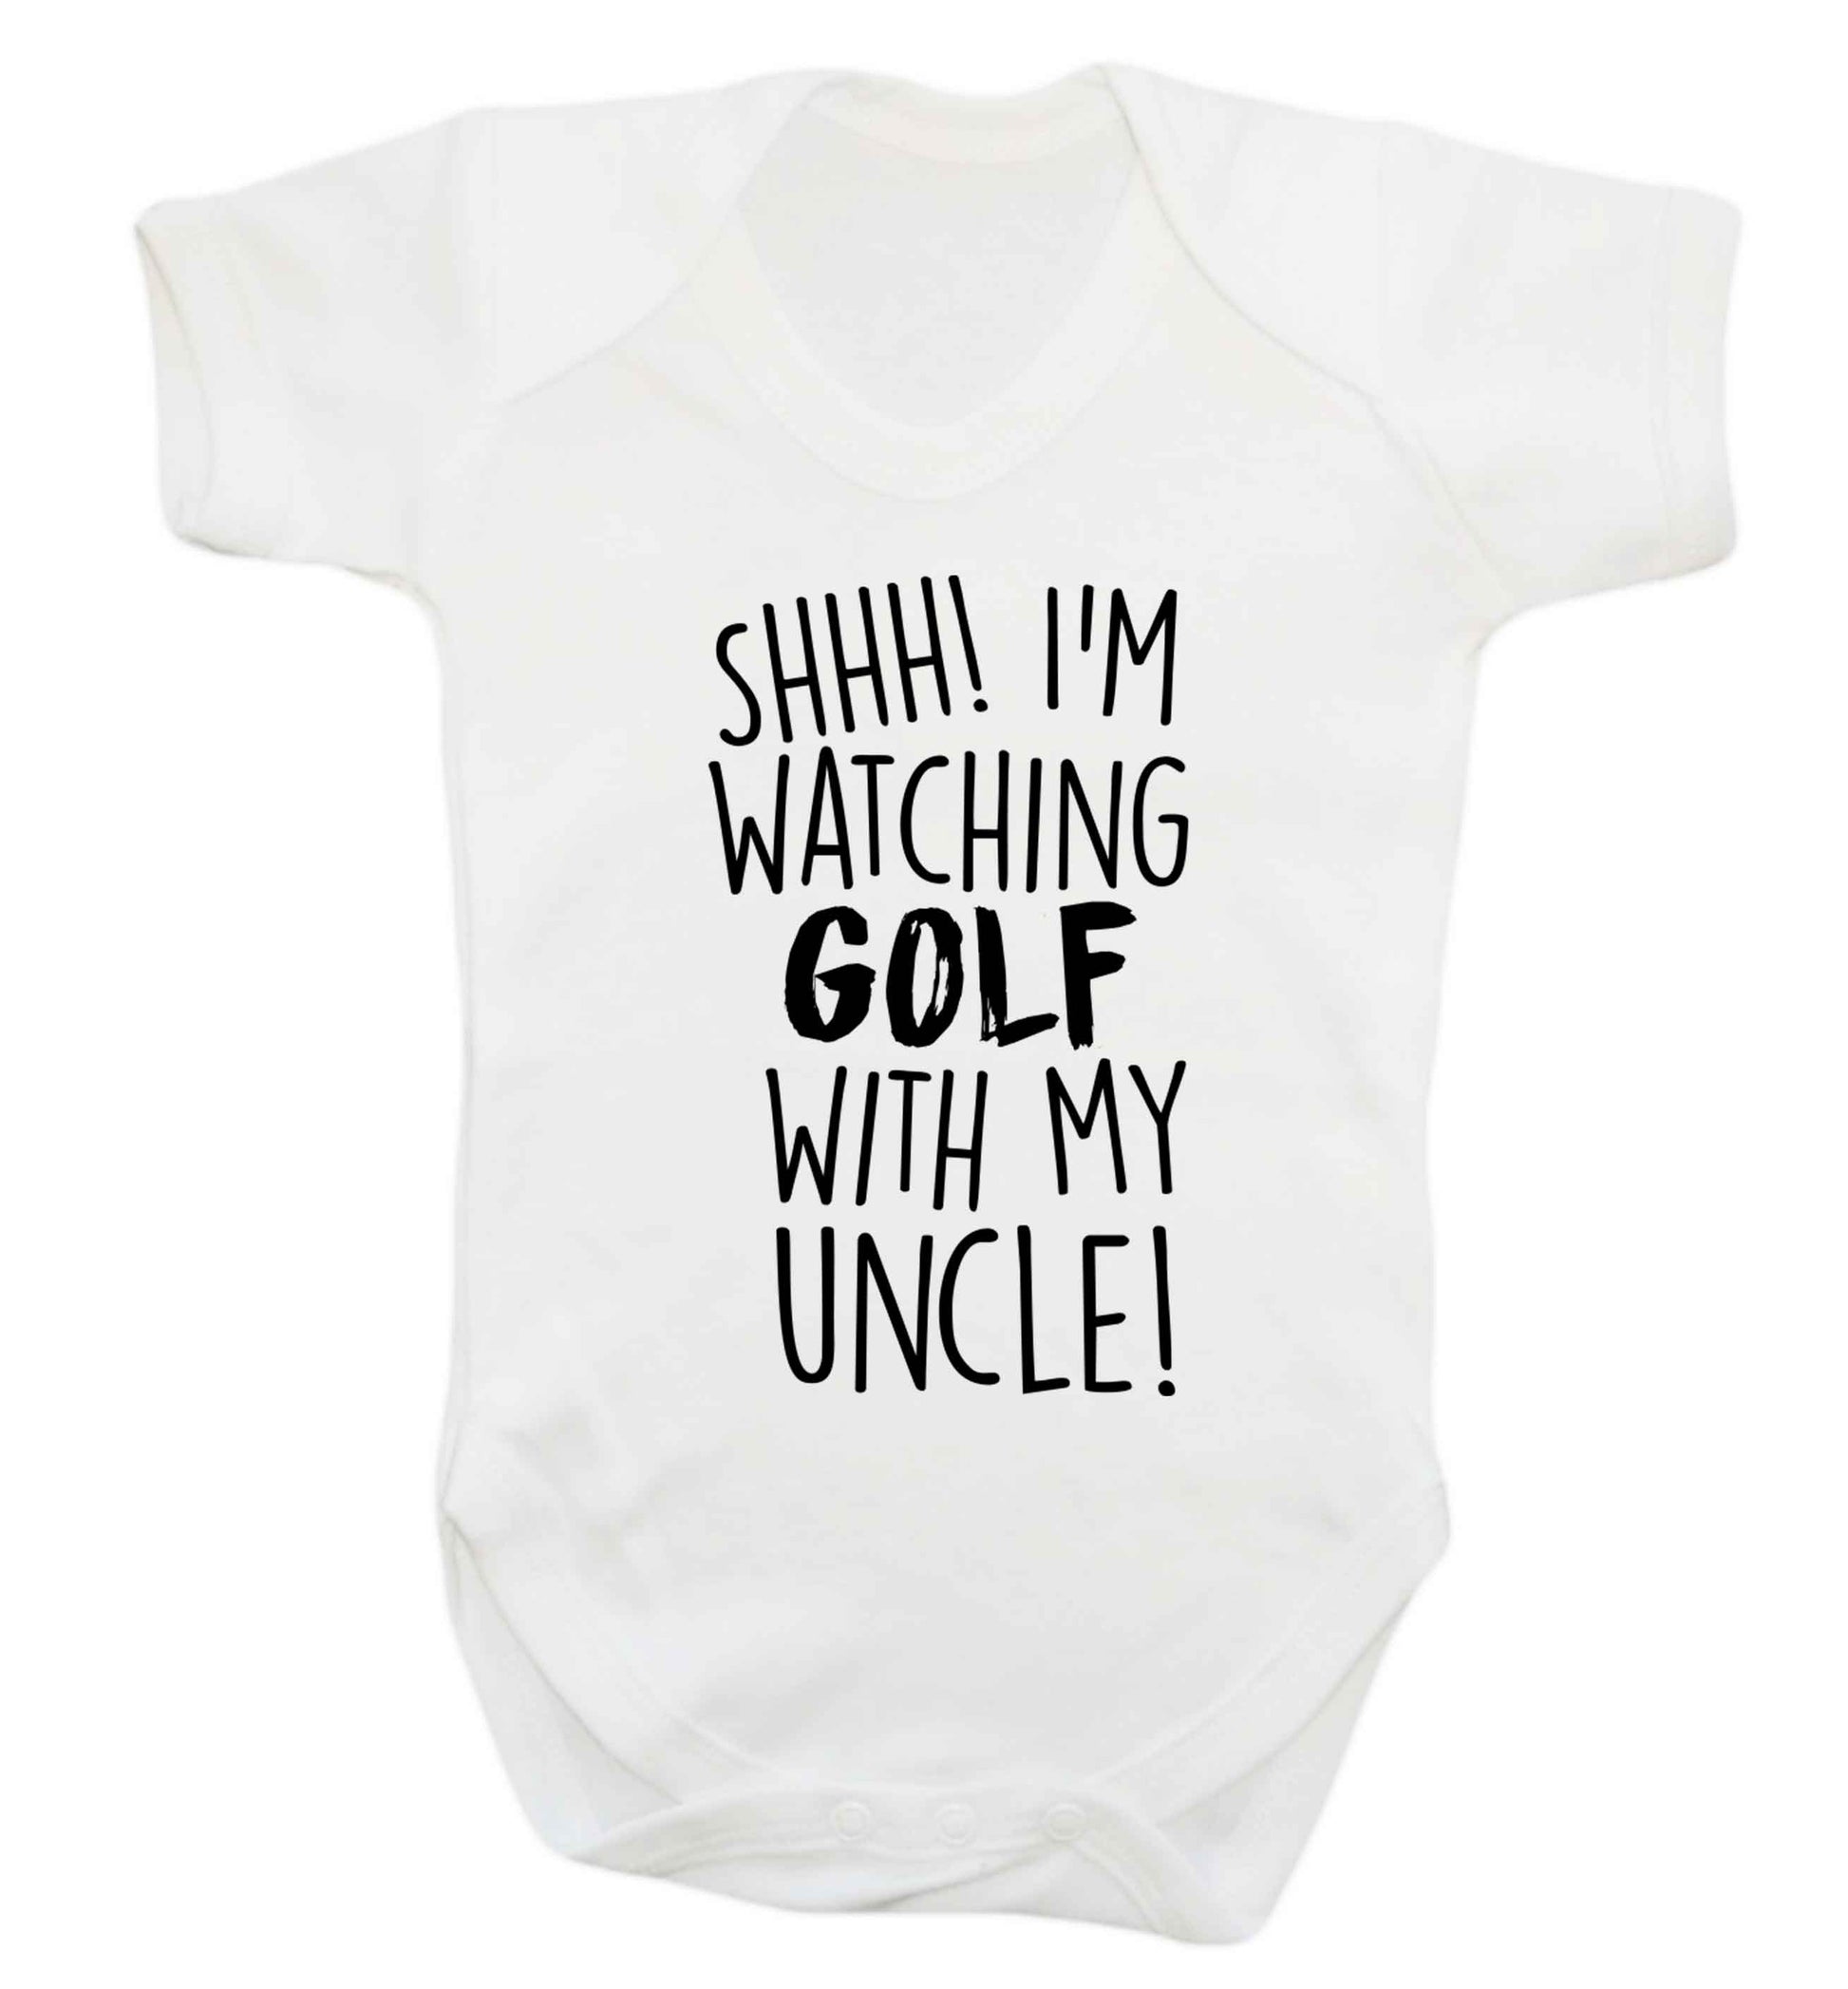 Shh I'm watching golf with my uncle Baby Vest white 18-24 months